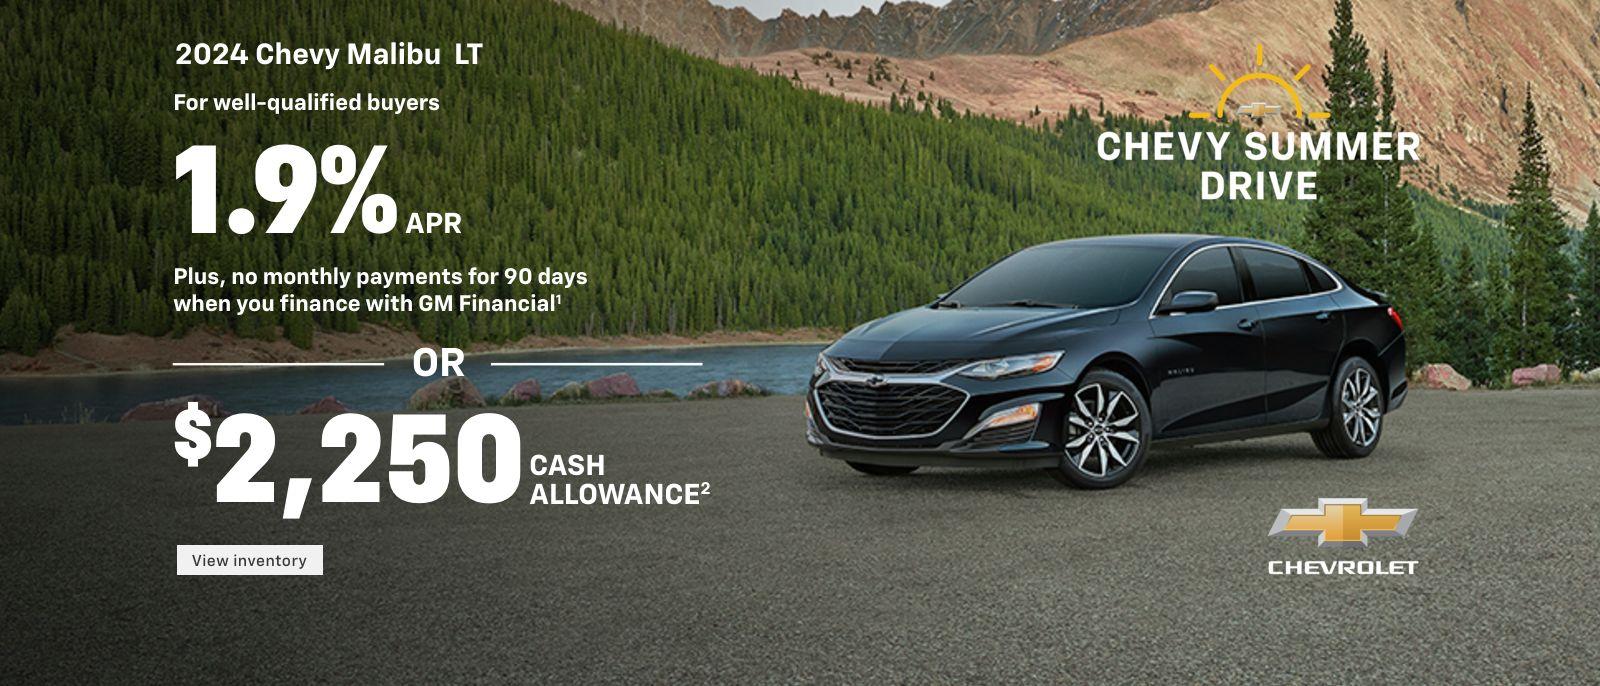 2024 Chevy Malibu LT. Follow the road to sunshine. For well-qualified buyers 1.9% APR + no monthly payments for 90 DAYS when you finance with GM Financial. Or, $2,250 cash allowance.